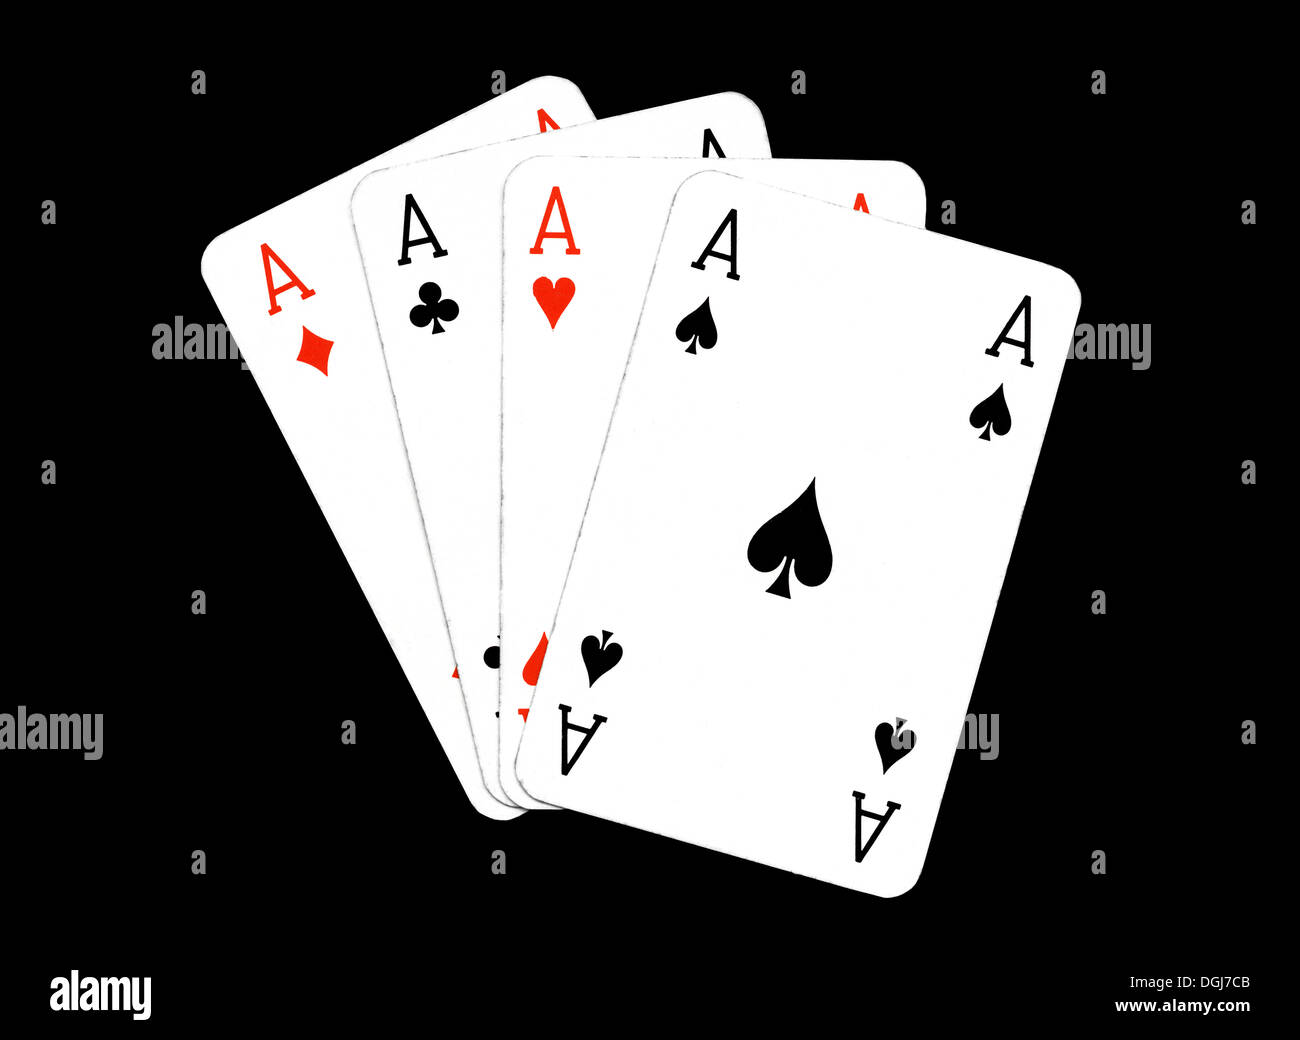 Playing Cards -  Four Aces Stock Photo